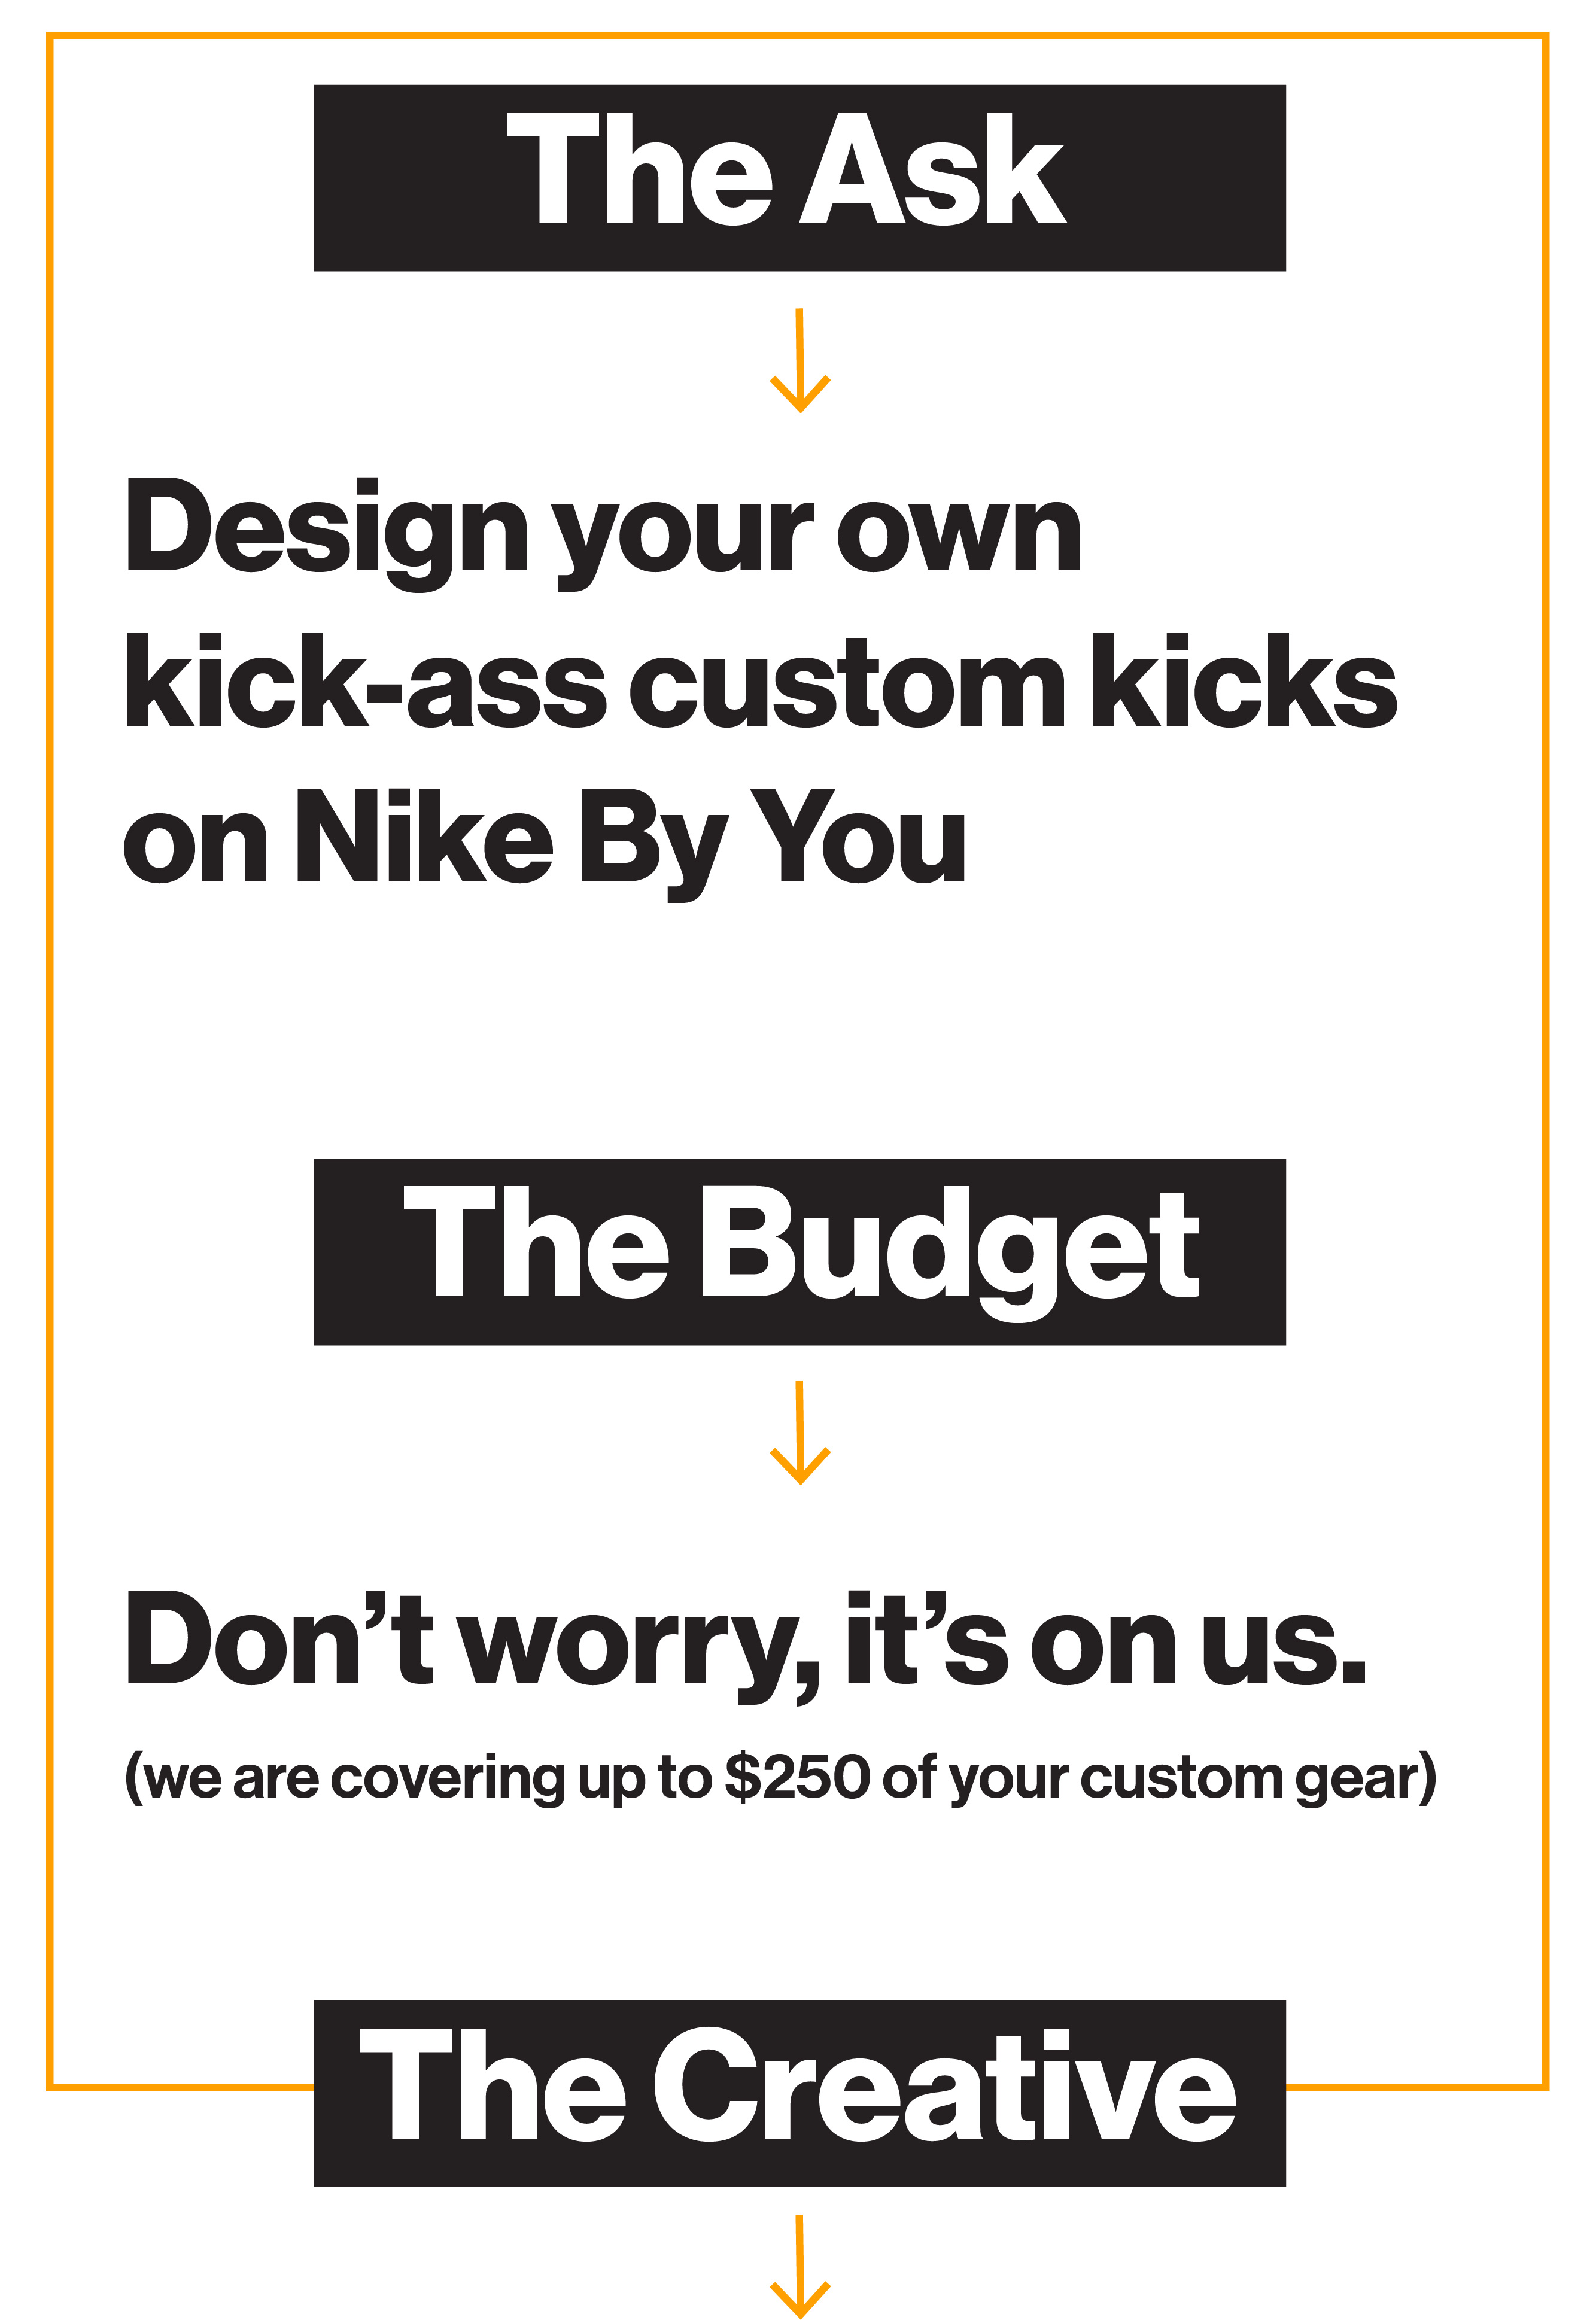 The Ask: Design your own kick-ass custom kicks on Nike By You. The Budget: Don't worry about it, it's on us. (we are covering upt to $250 of your custom gear)